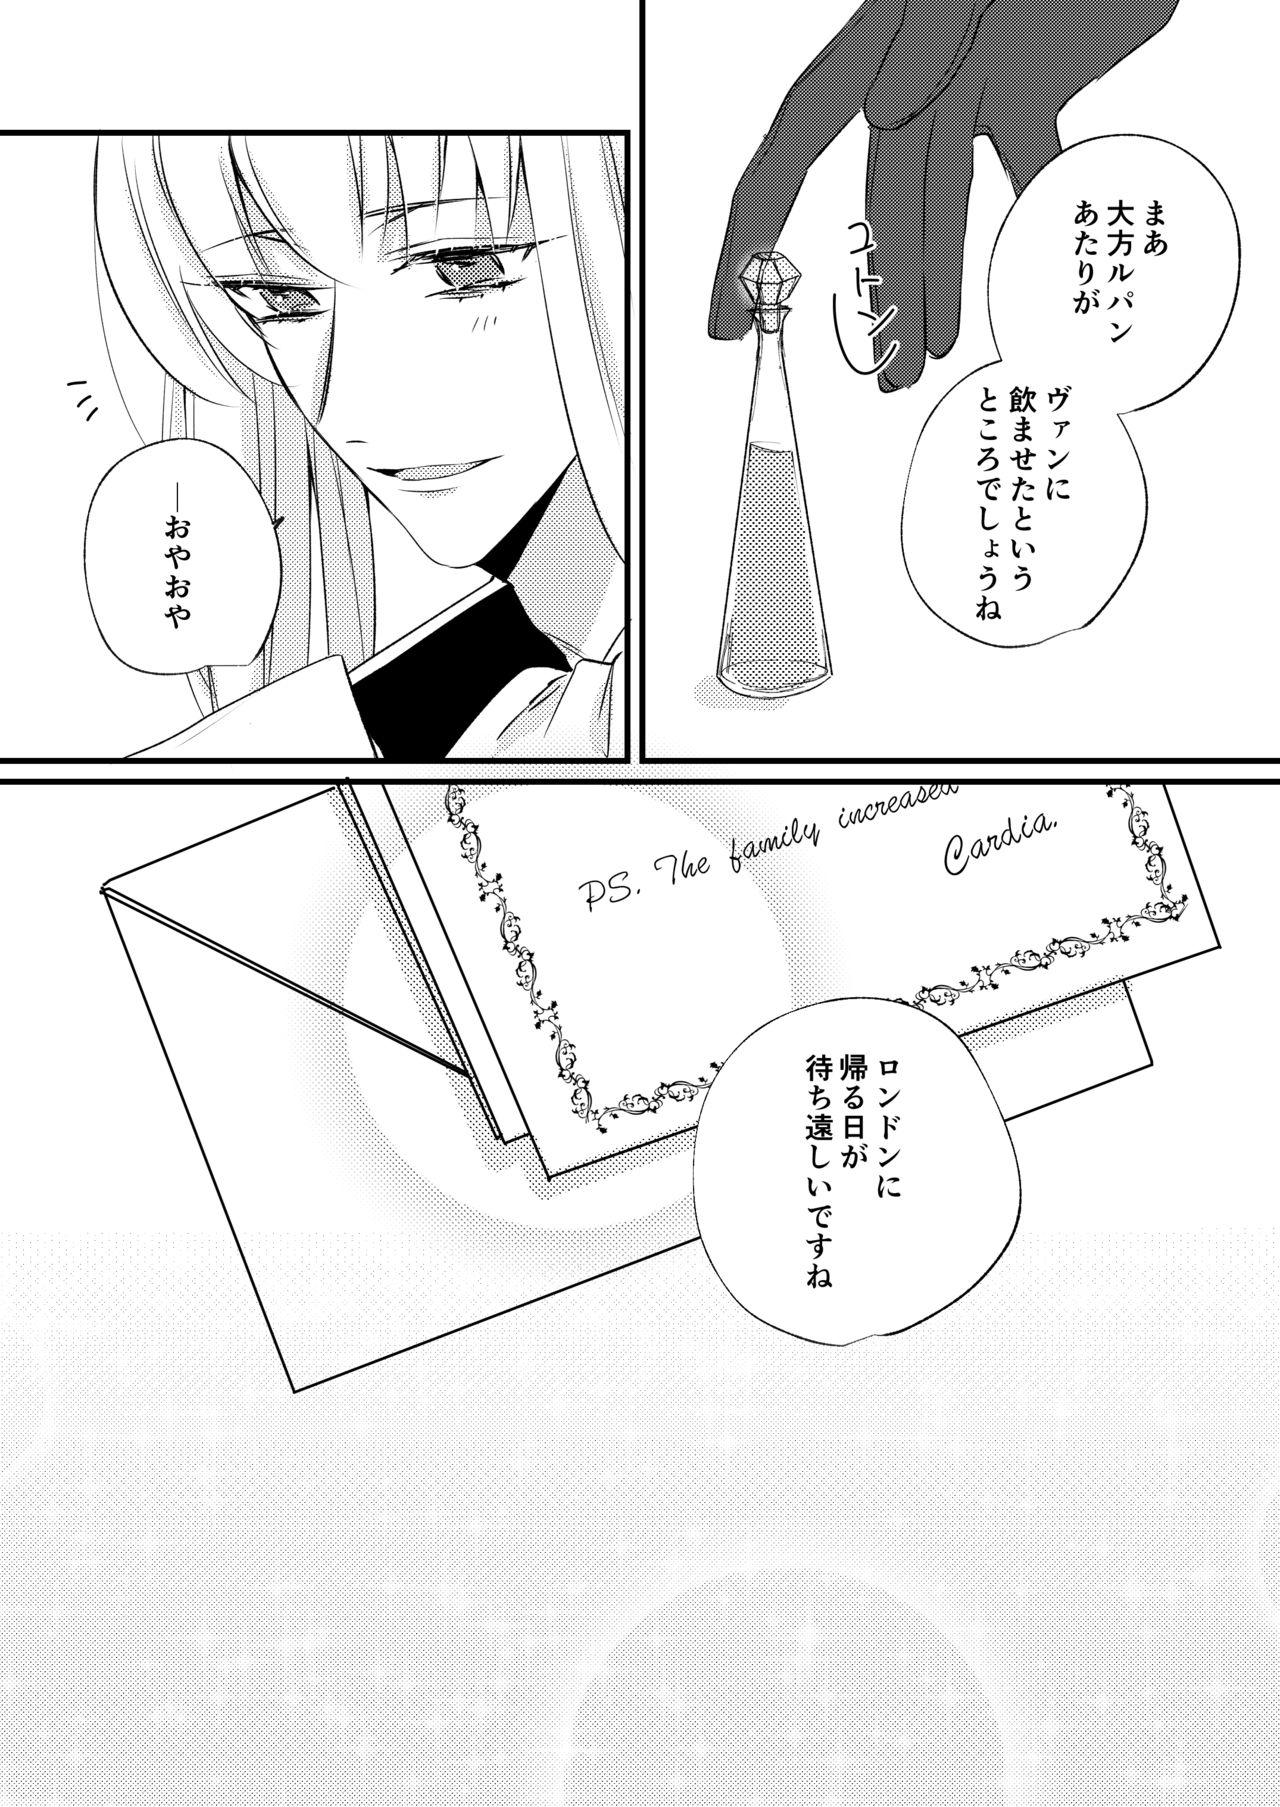 Delicia 熱におぼれる - Code realize sousei no himegimi Hogtied - Page 28